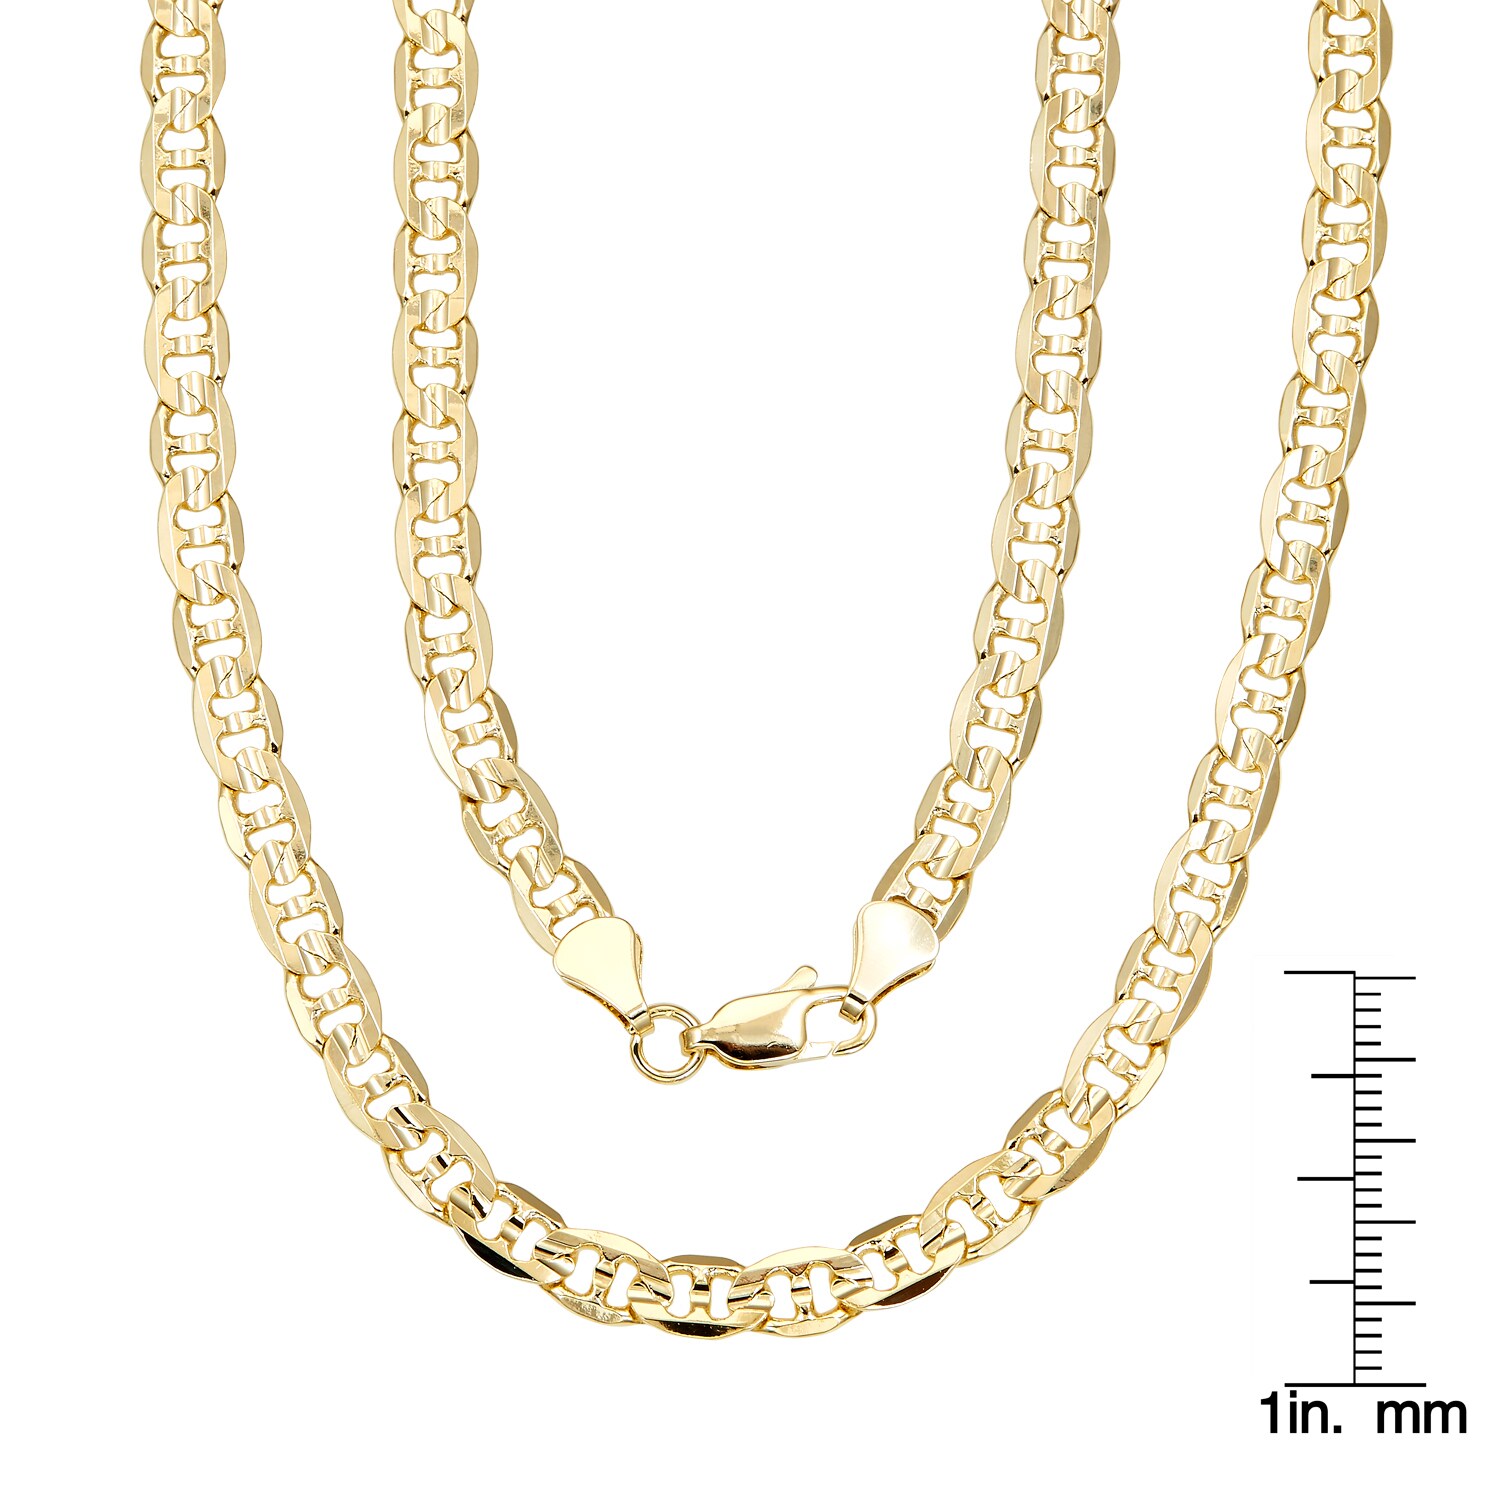 6mm Gucci-style (Mariner) Gold Overlay 